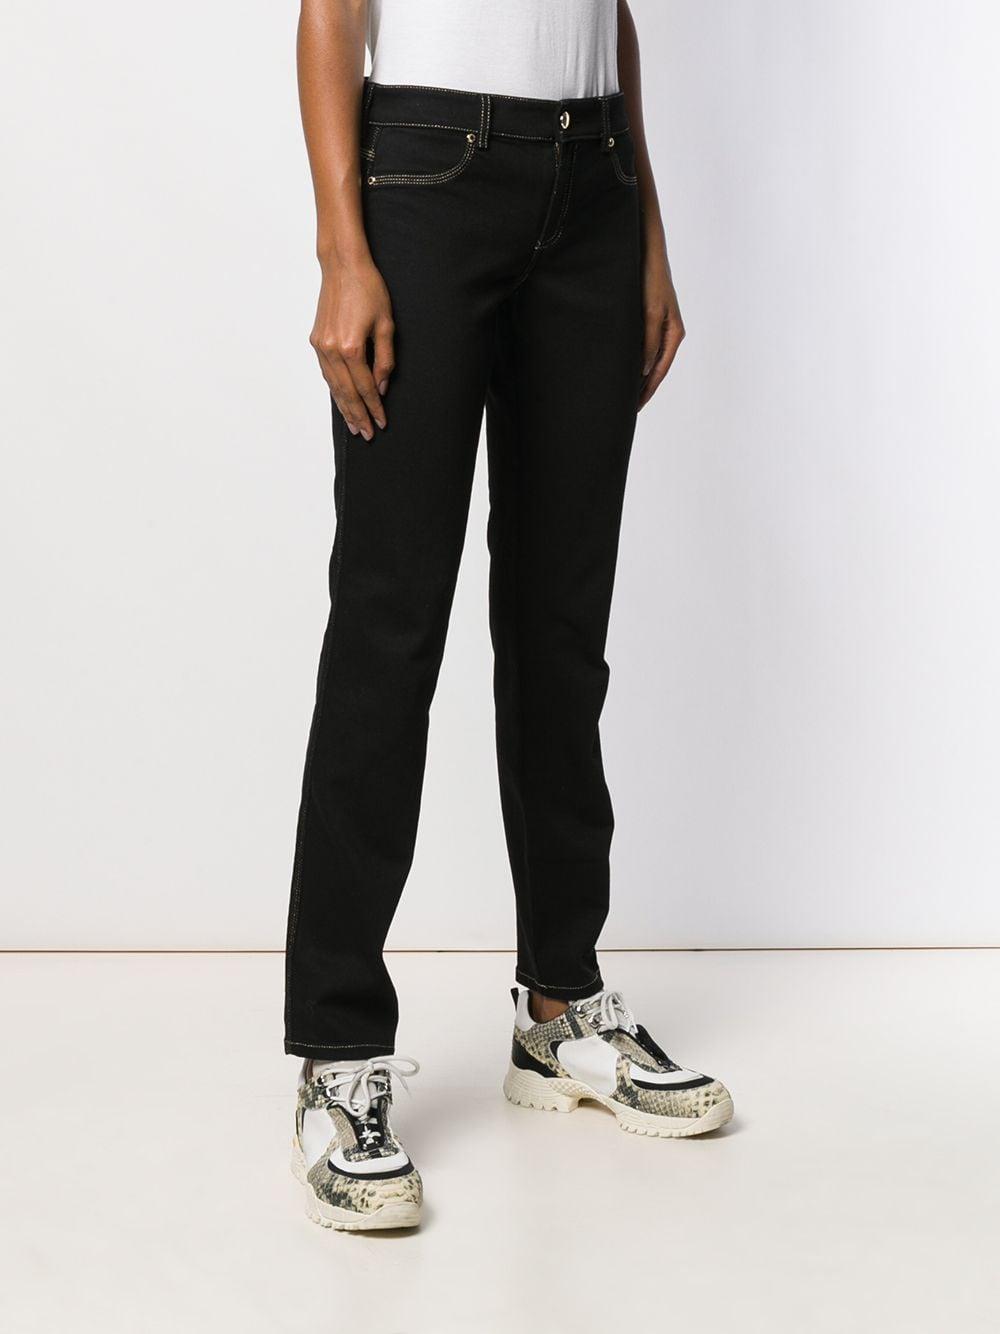 Versace Jeans Denim Contrast Stitching Jeans in Black - Lyst